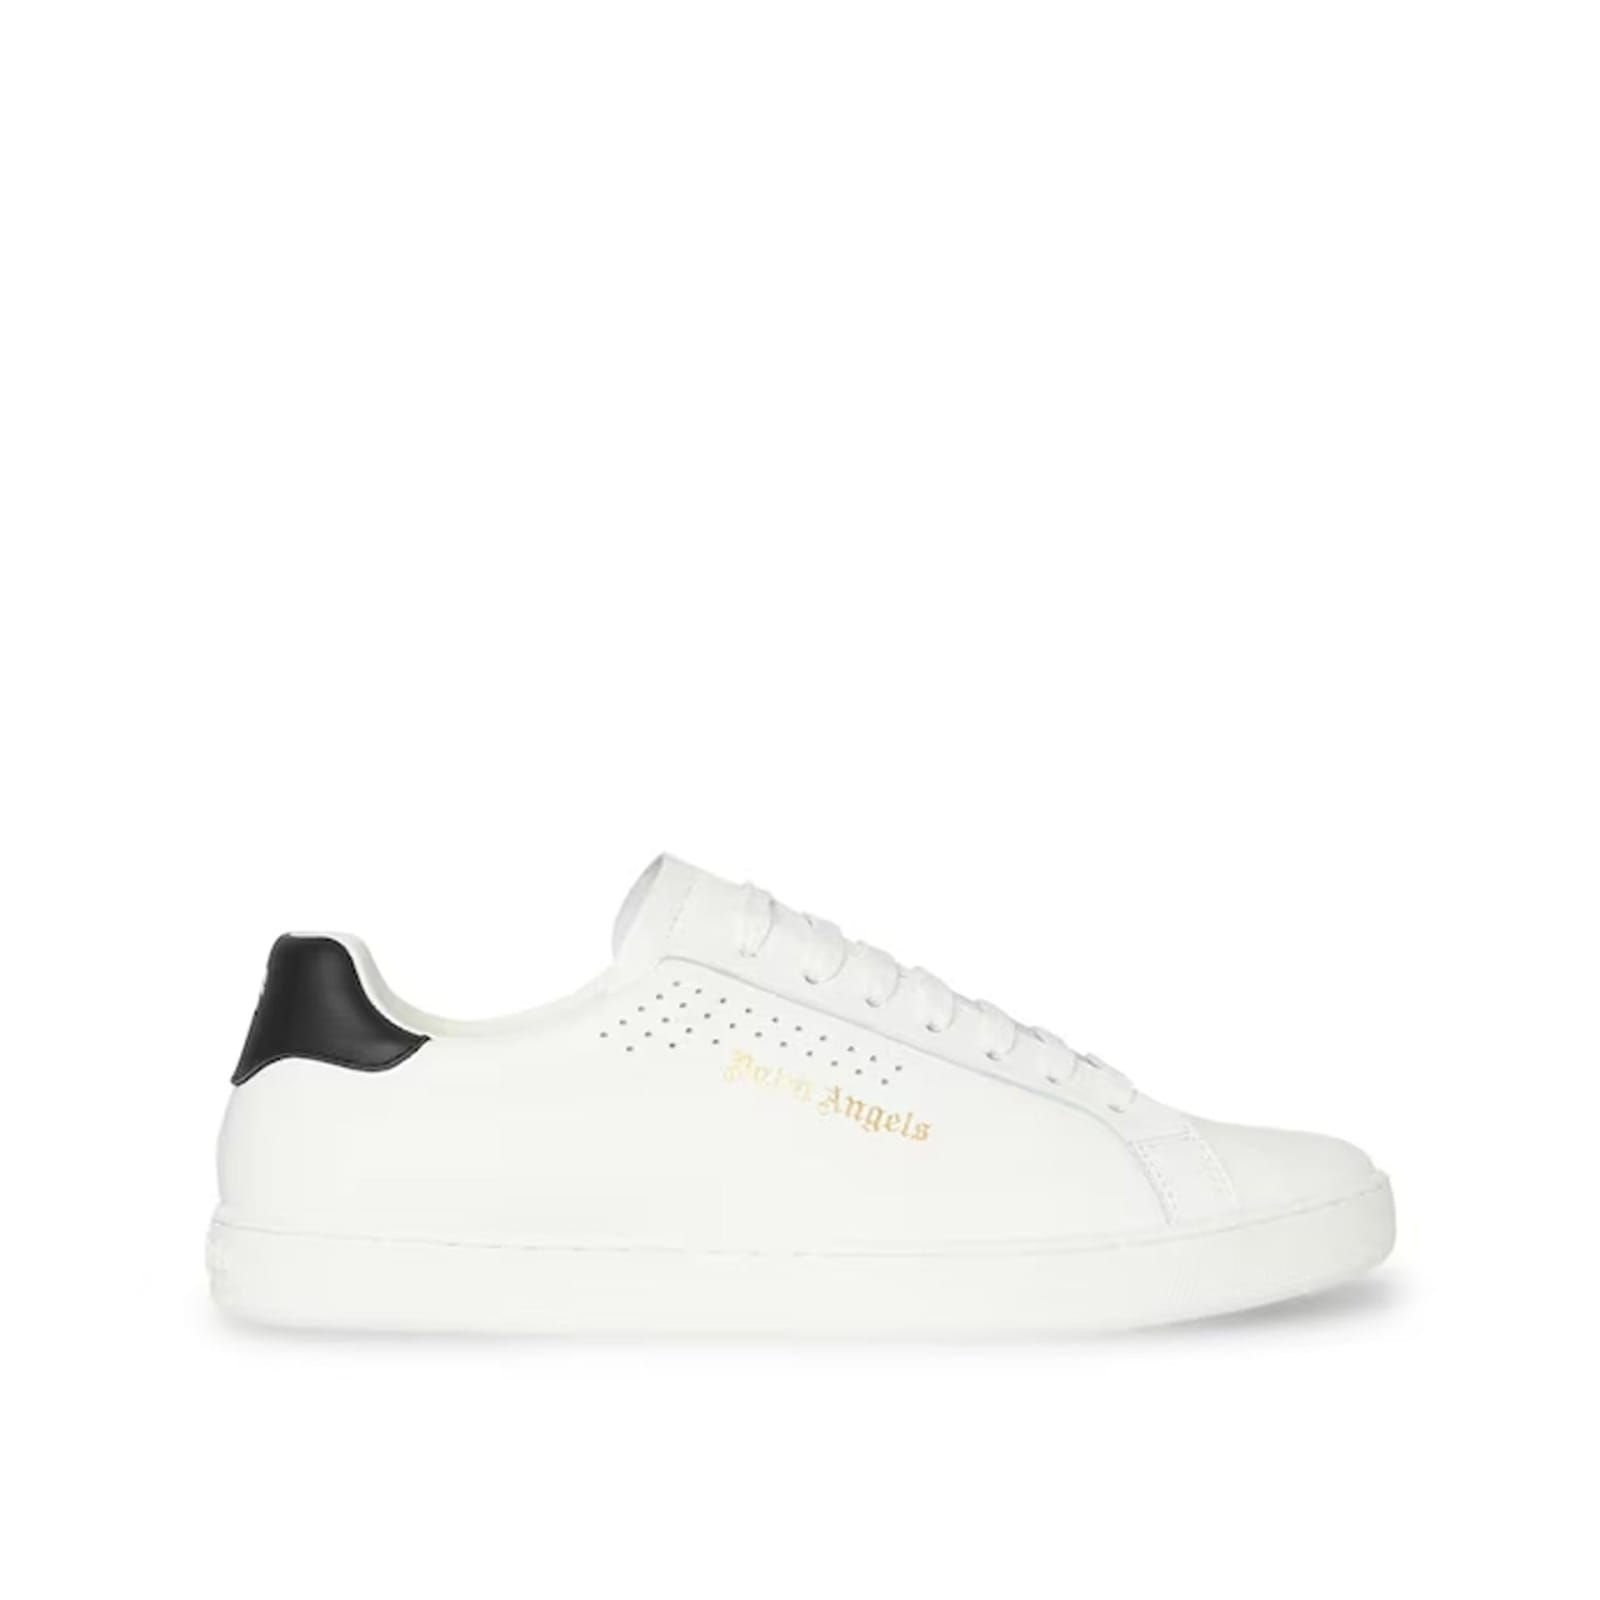 PALM ANGELS LEATHER LOGO SNEAKERS